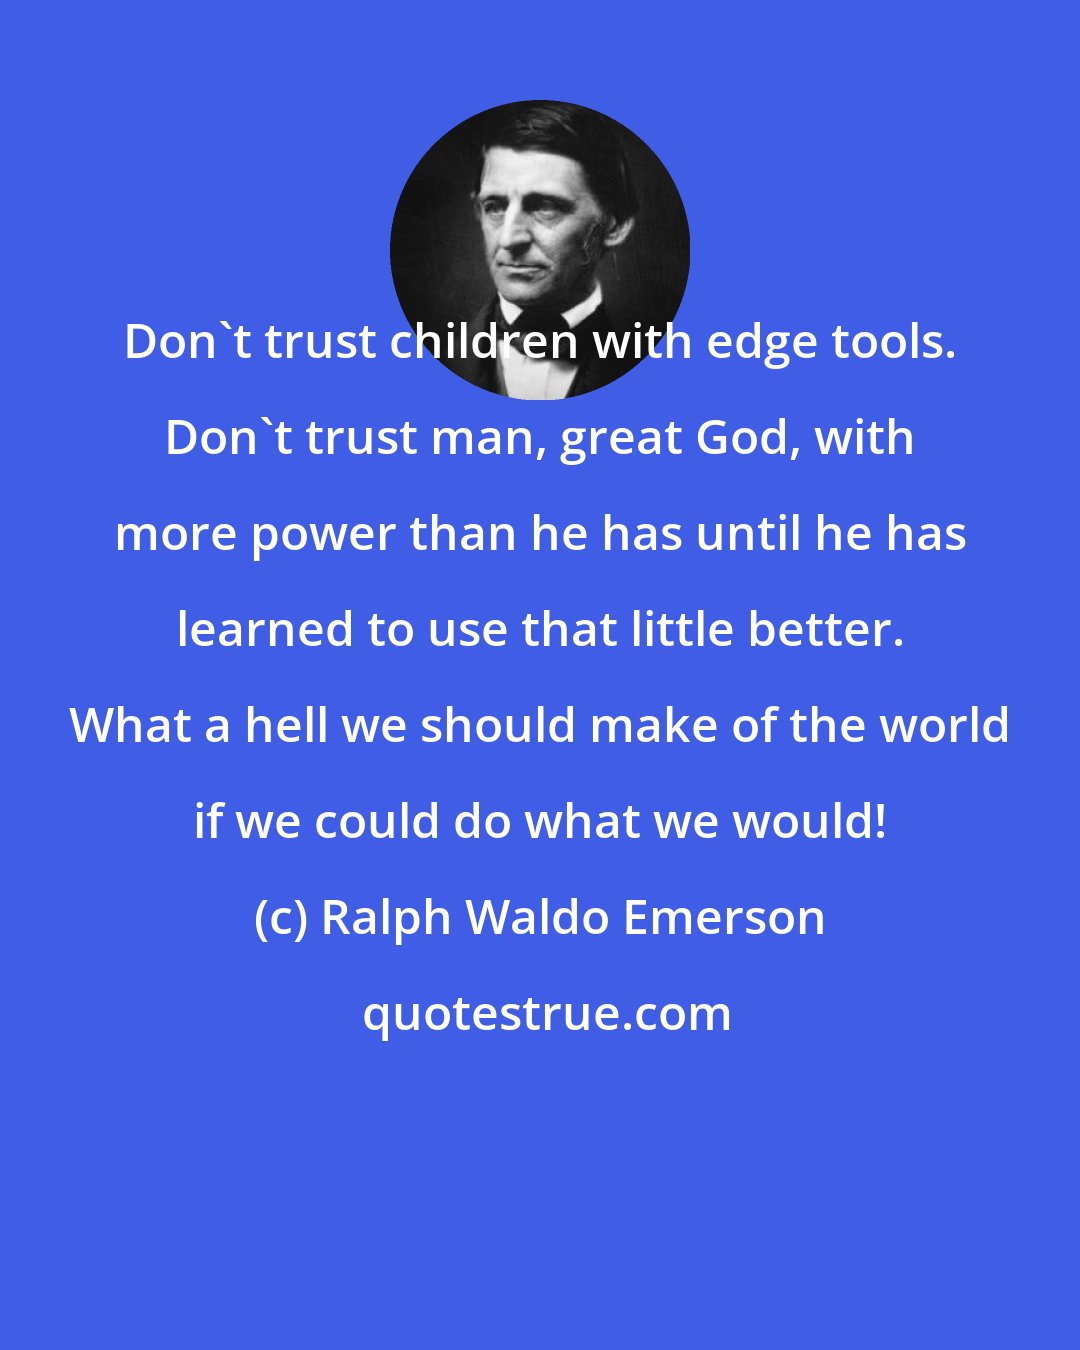 Ralph Waldo Emerson: Don't trust children with edge tools. Don't trust man, great God, with more power than he has until he has learned to use that little better. What a hell we should make of the world if we could do what we would!